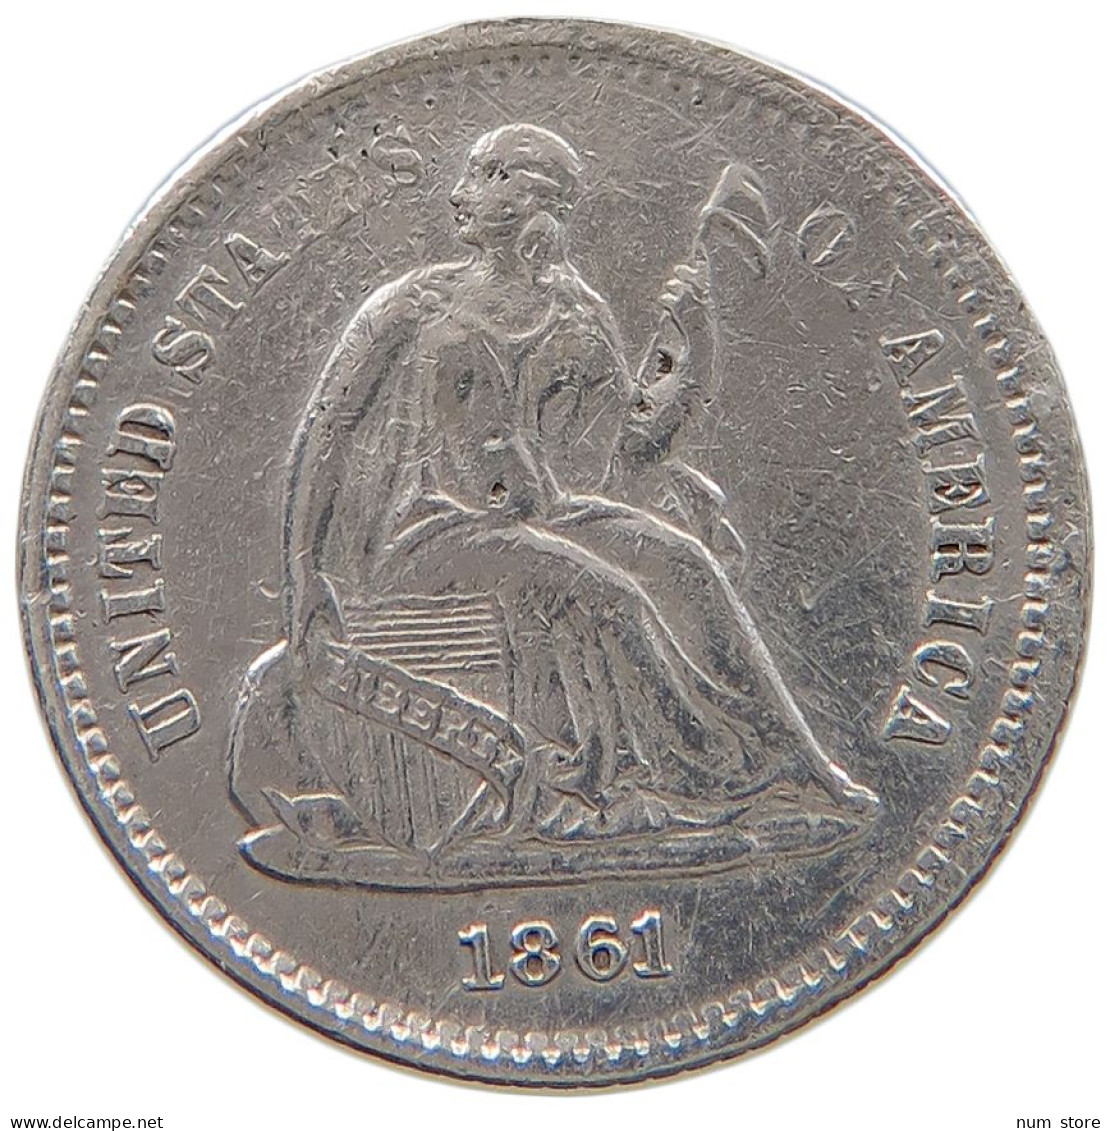 UNITED STATES OF AMERICA HALF DIME 1861 SEATED LIBERTY ENGRAVED #t156 0521 - Half Dimes (Demi Dimes)